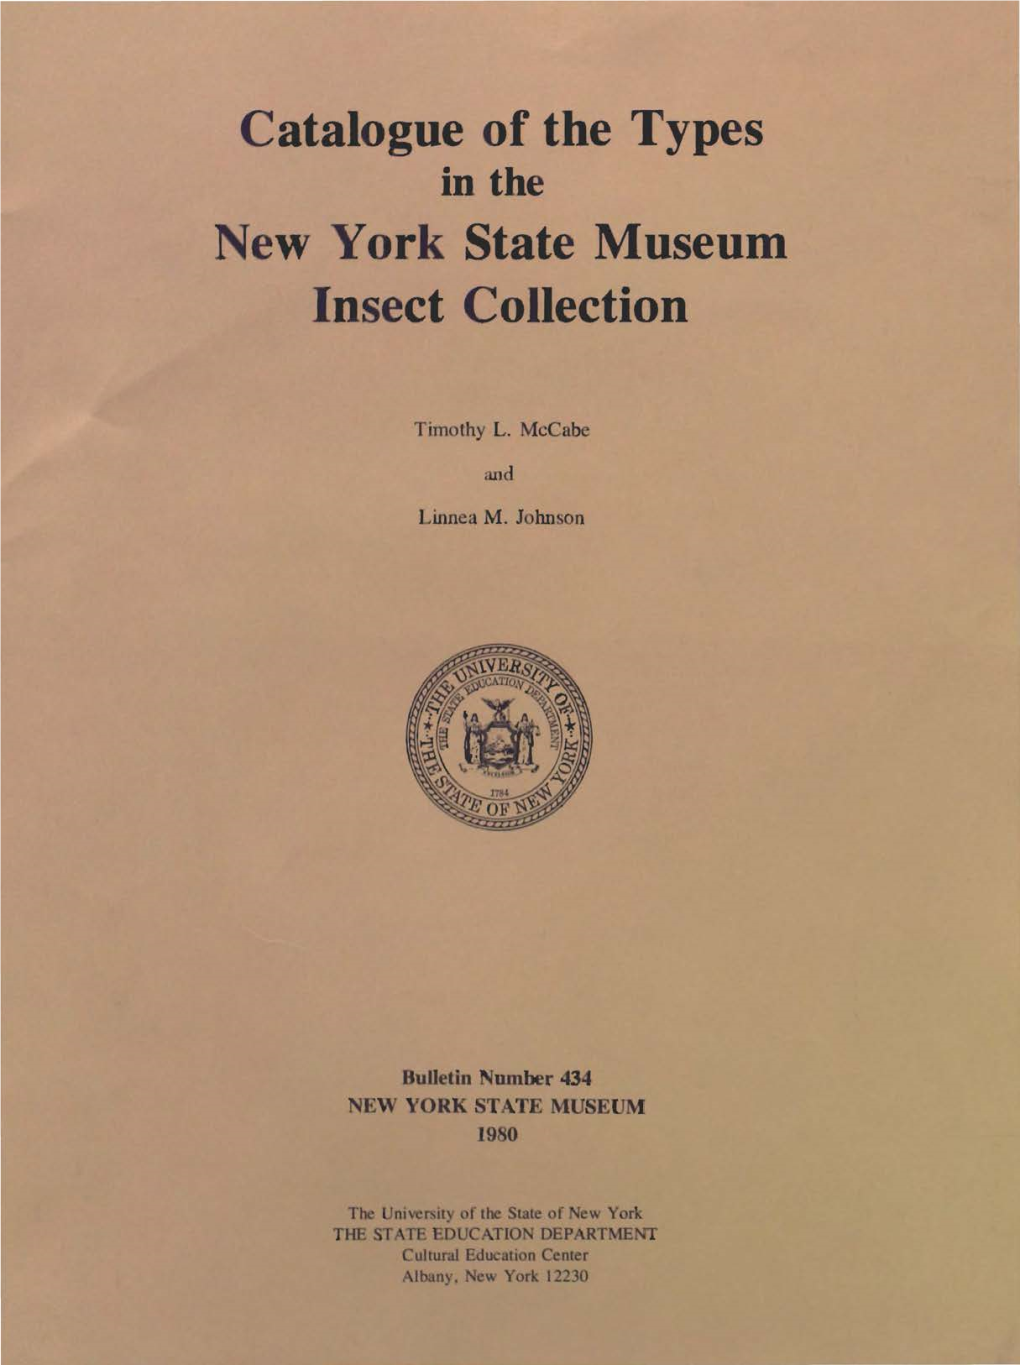 Catalogue of the Types in the New York State Museum Insect Collection